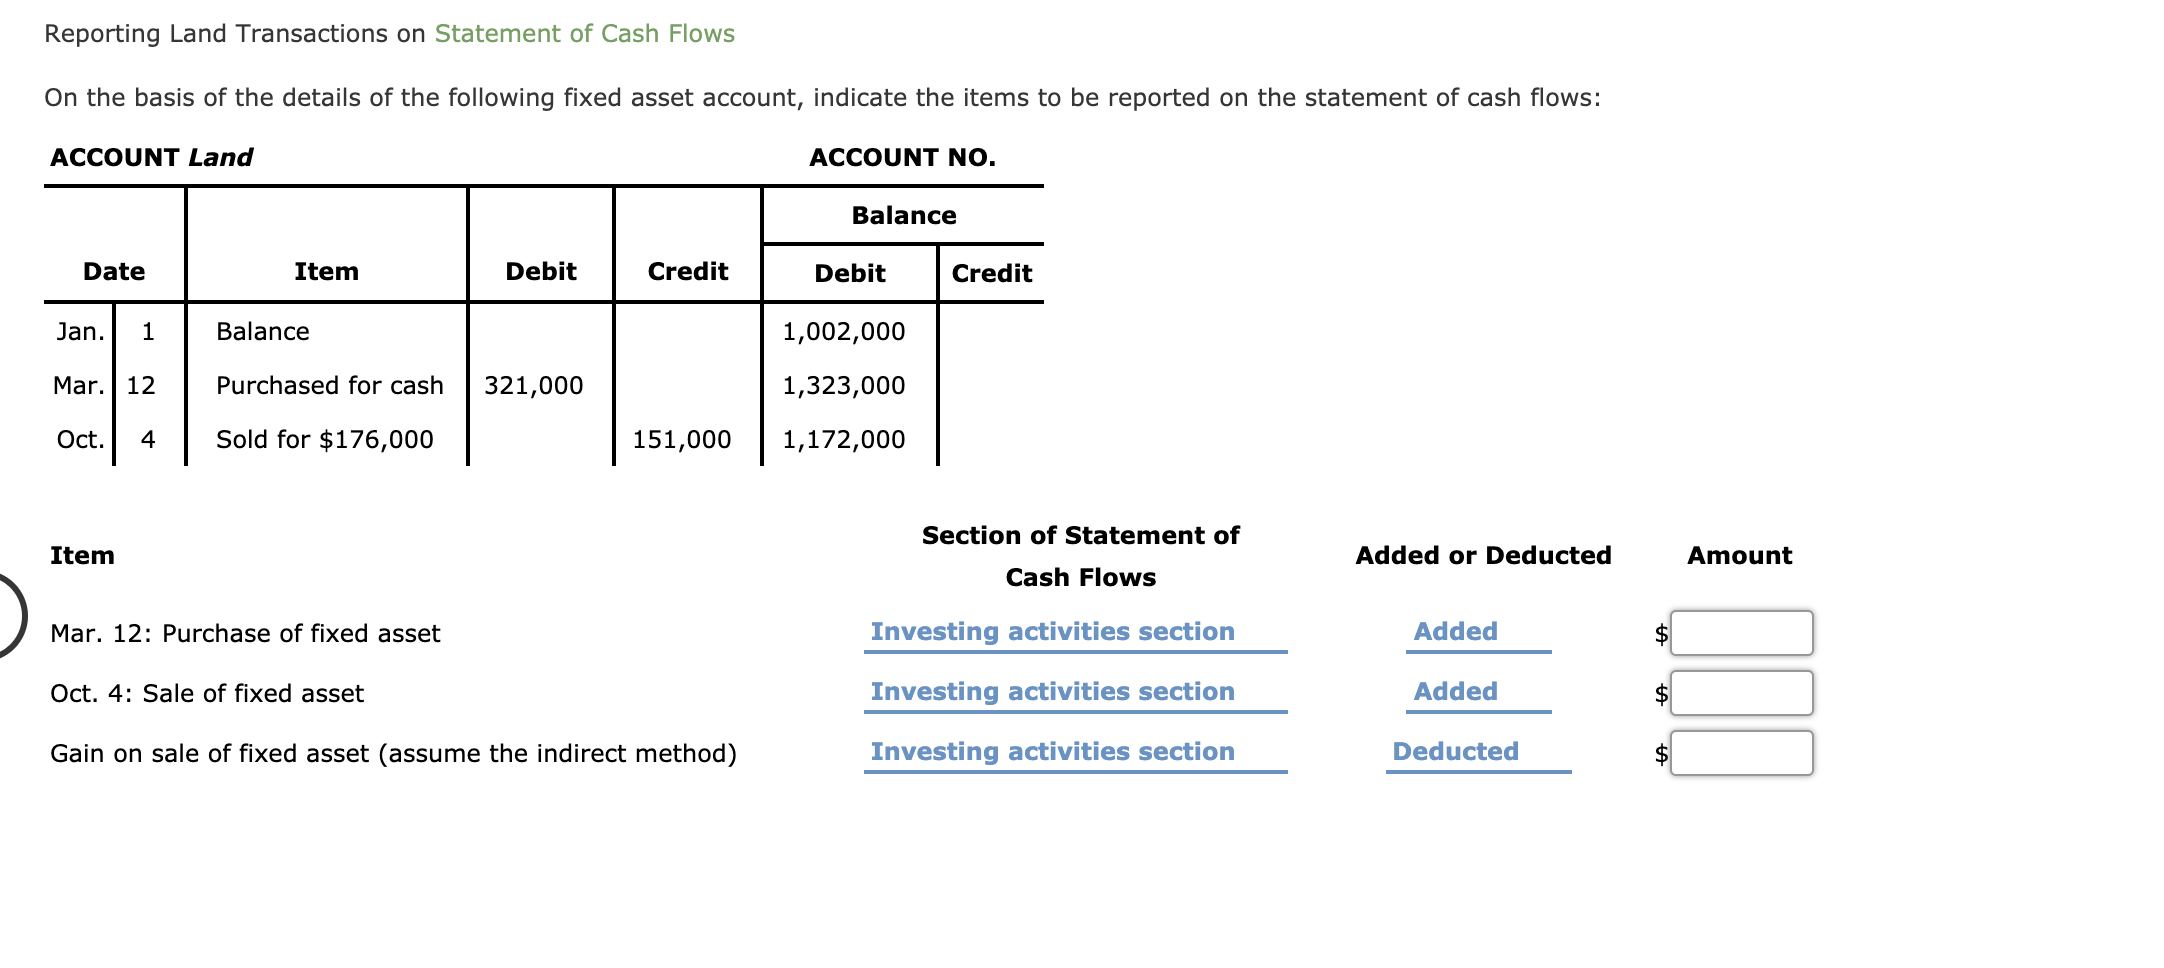 On the basis of the details of the following fixed asset account, indicate the items to be reported on the statement of cash flows:
ACCOUNT Land
АСCOUNT NO.
Balance
Date
Item
Debit
Credit
Debit
Credit
Jan.
1
Balance
1,002,000
Mar. 12
Purchased for cash
321,000
1,323,000
Oct.
4
Sold for $176,000
151,000
1,172,000
Section of Statement of
Item
Added or Deducted
Amount
Cash Flows
Mar. 12: Purchase of fixed asset
Investing activities section
Added
Oct. 4: Sale of fixed asset
Investing activities section
Added
Gain on sale of fixed asset (assume the indirect method)
Investing activities section
Deducted
